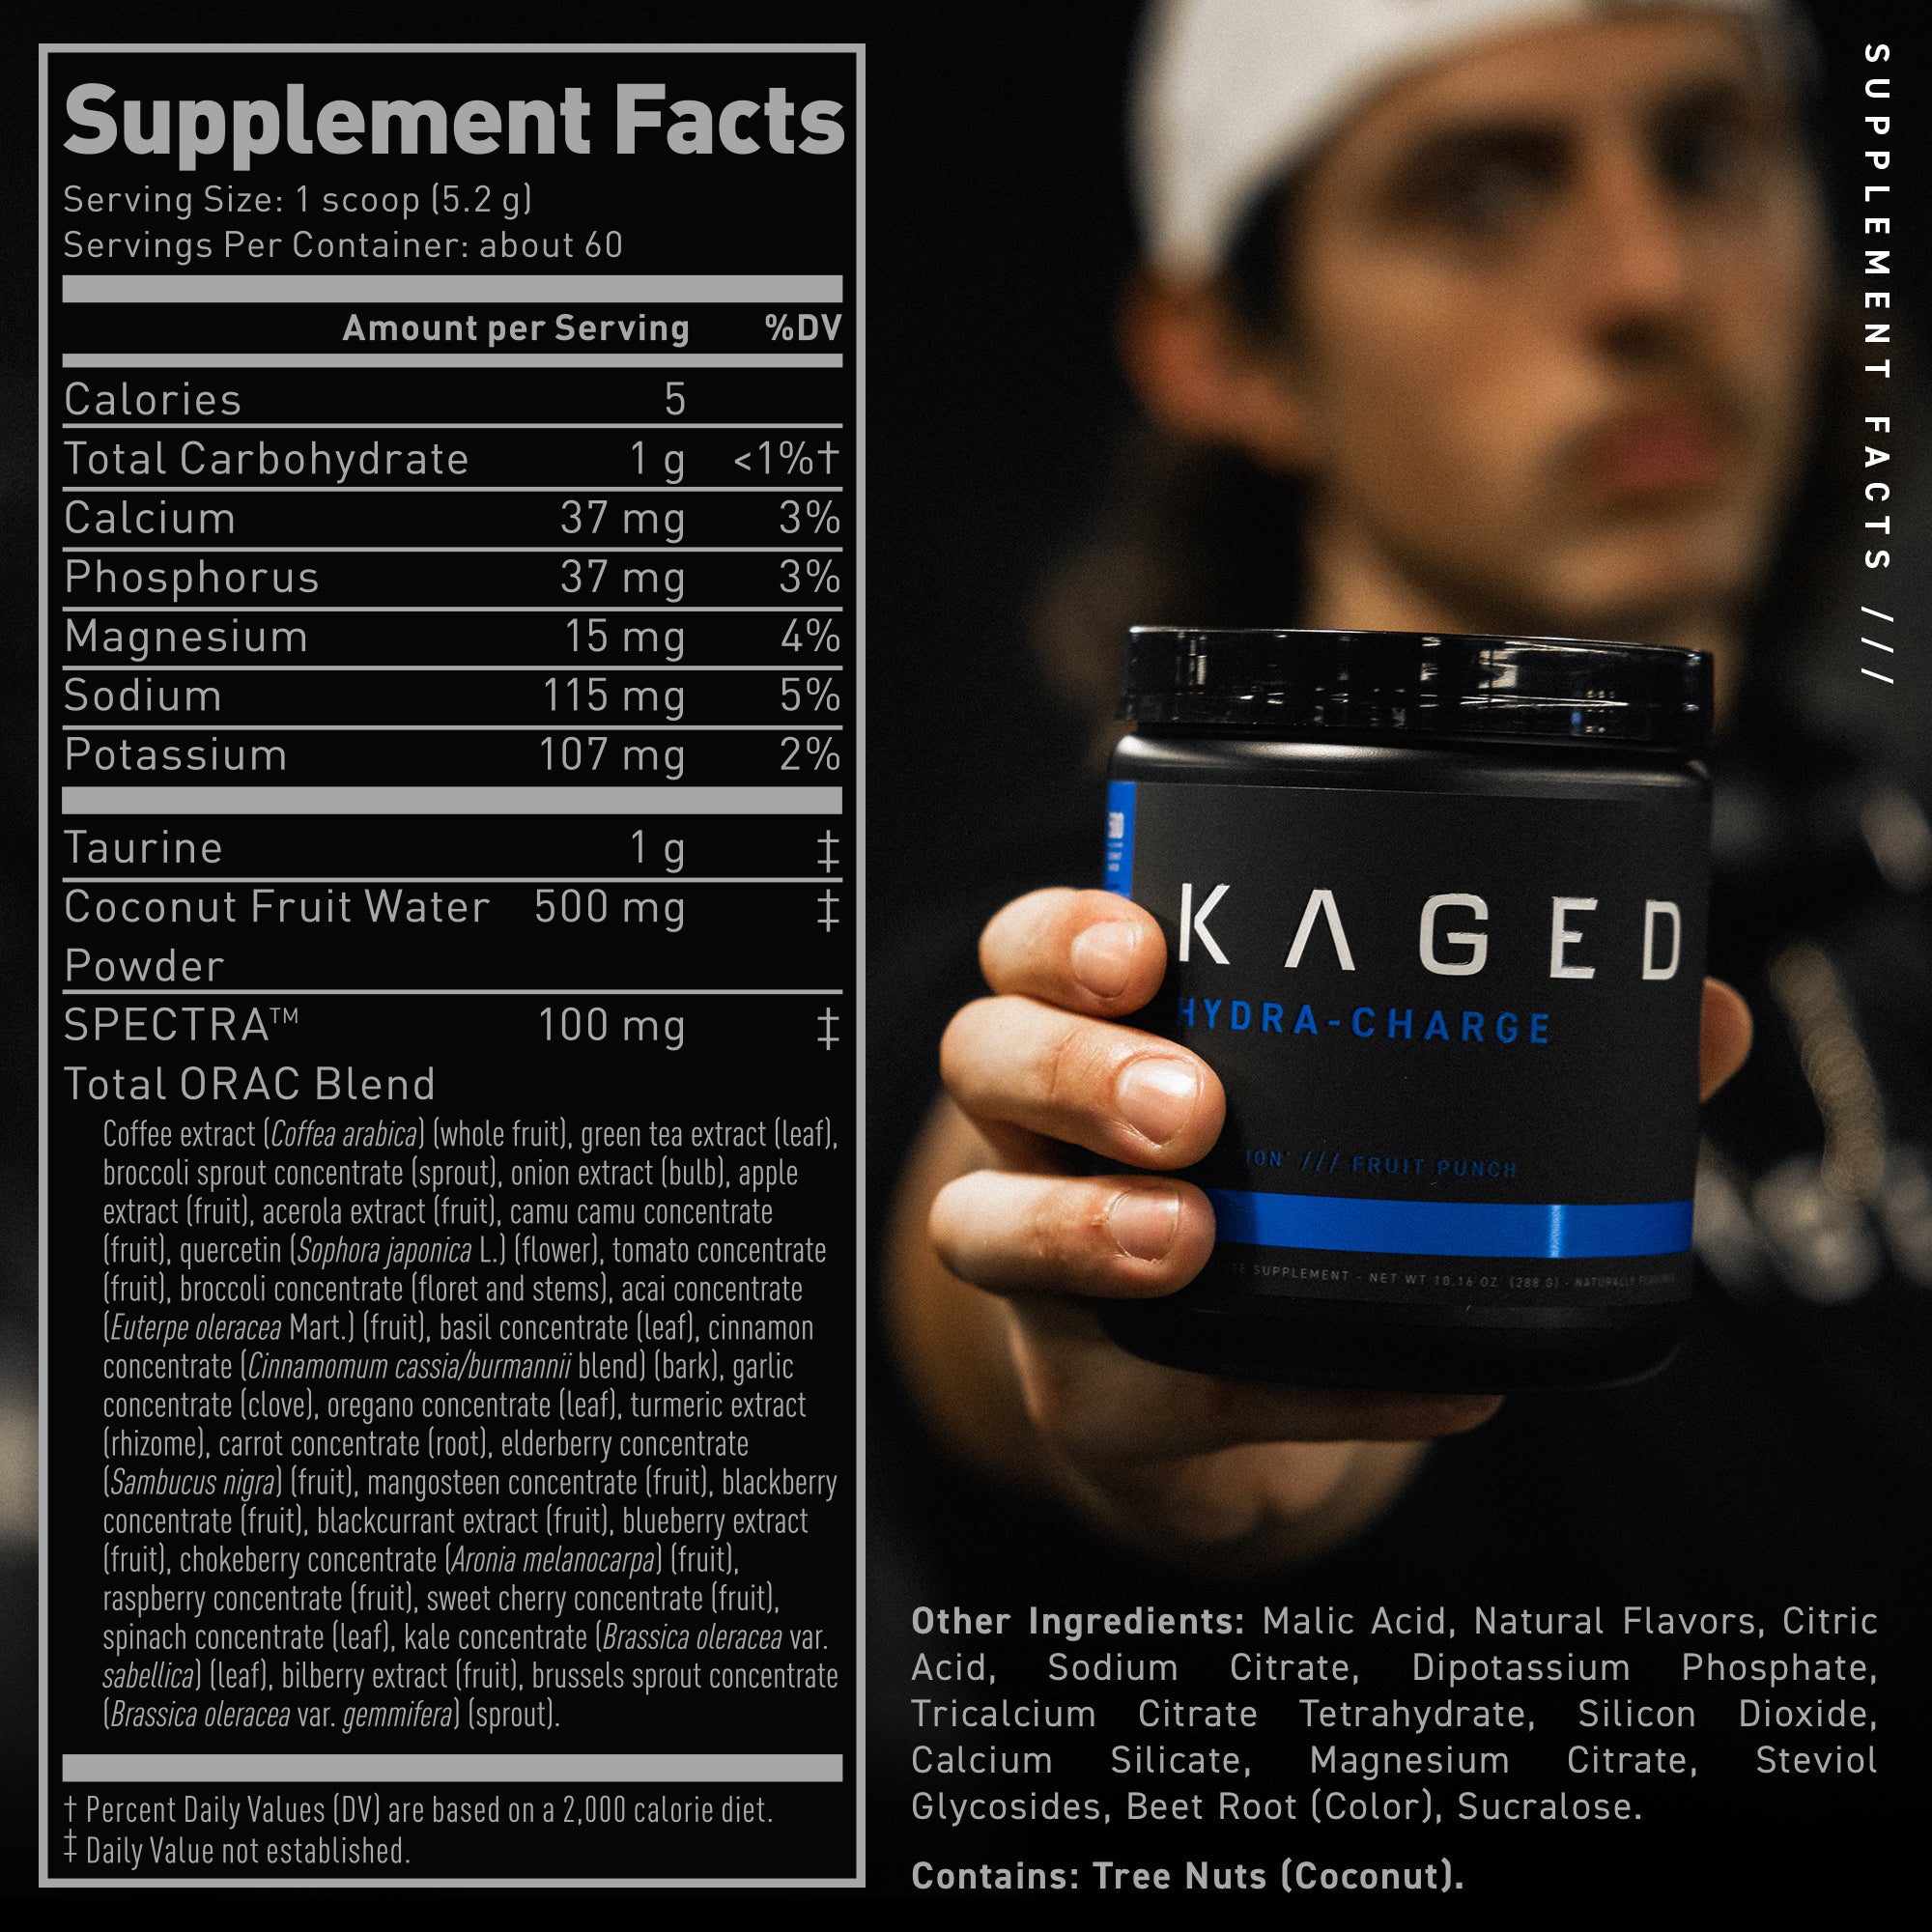 Kaged | Hydra-Charge - Healthy Sports Hydration